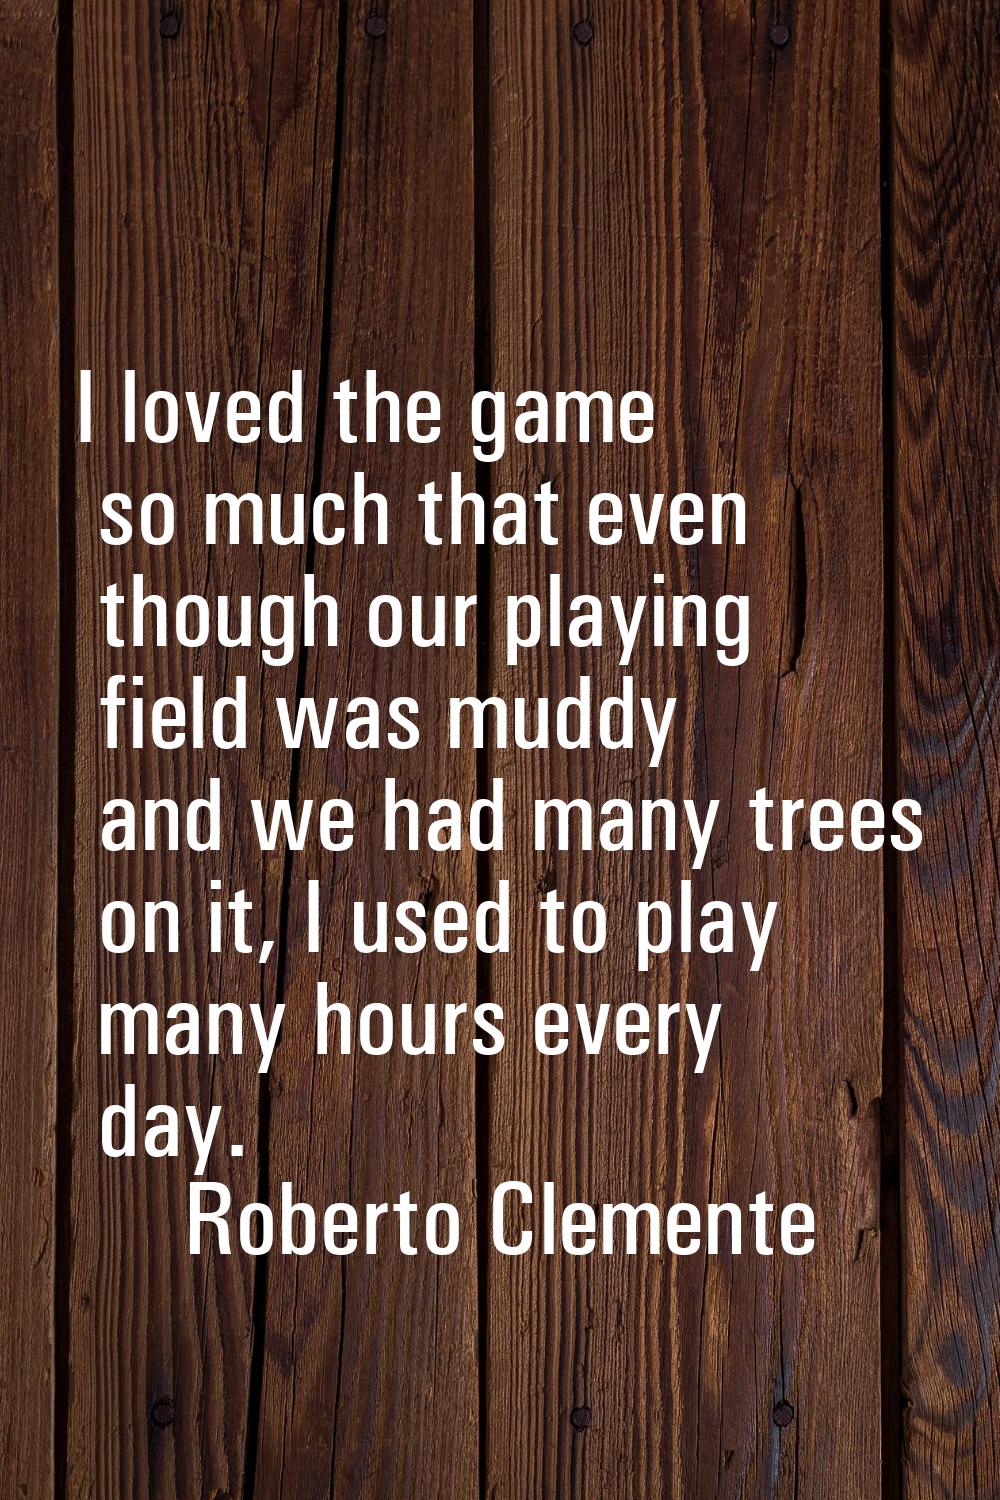 I loved the game so much that even though our playing field was muddy and we had many trees on it, 